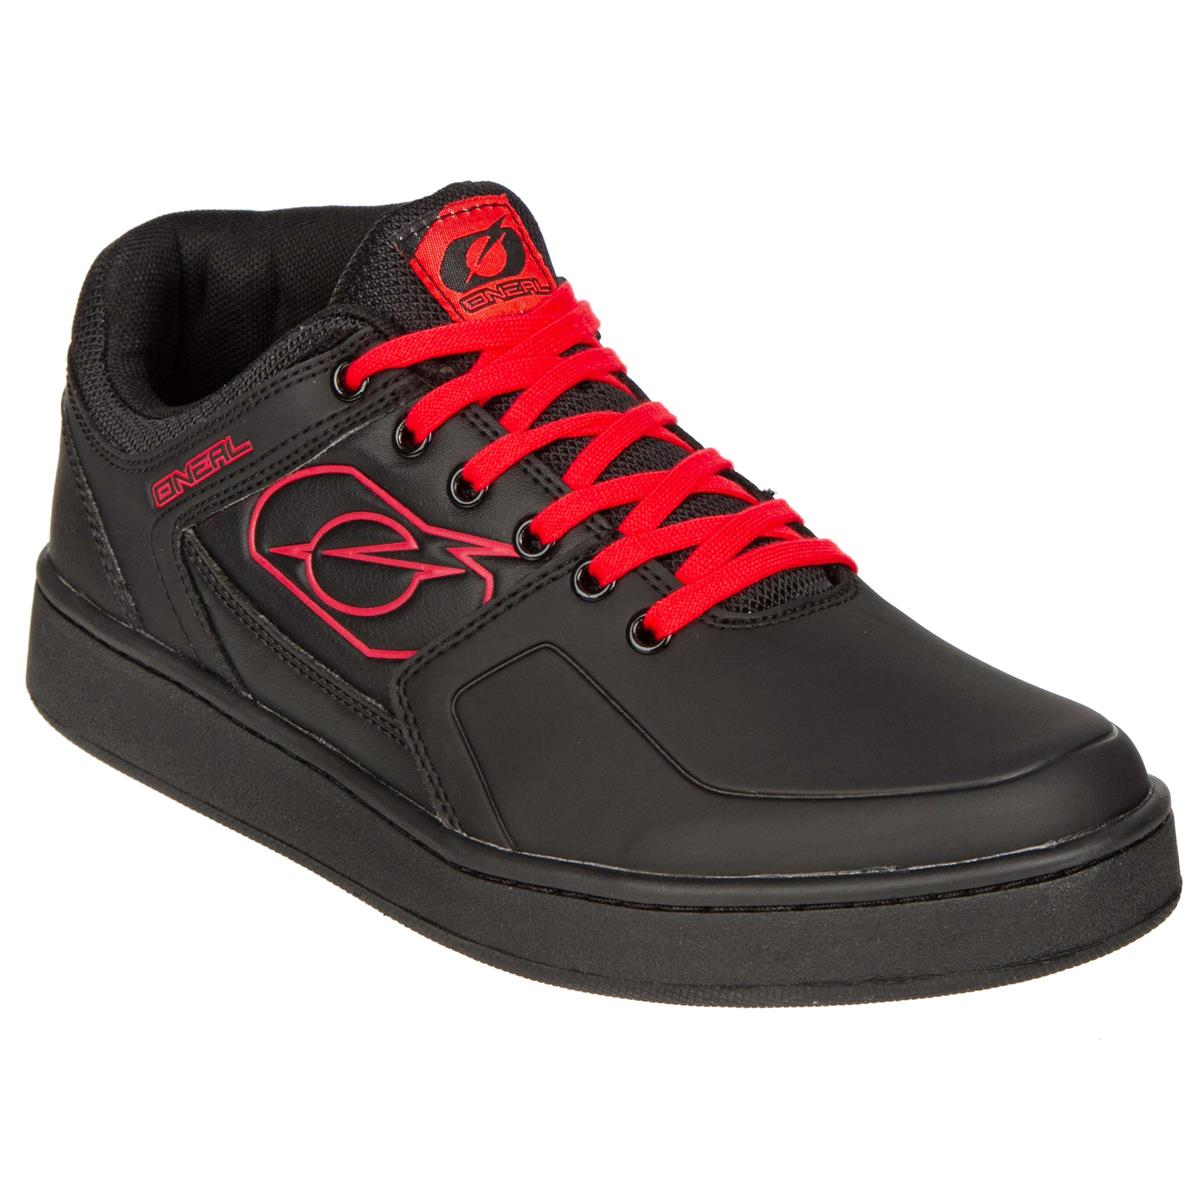 O'Neal Bike Shoes Pinned Pro Red